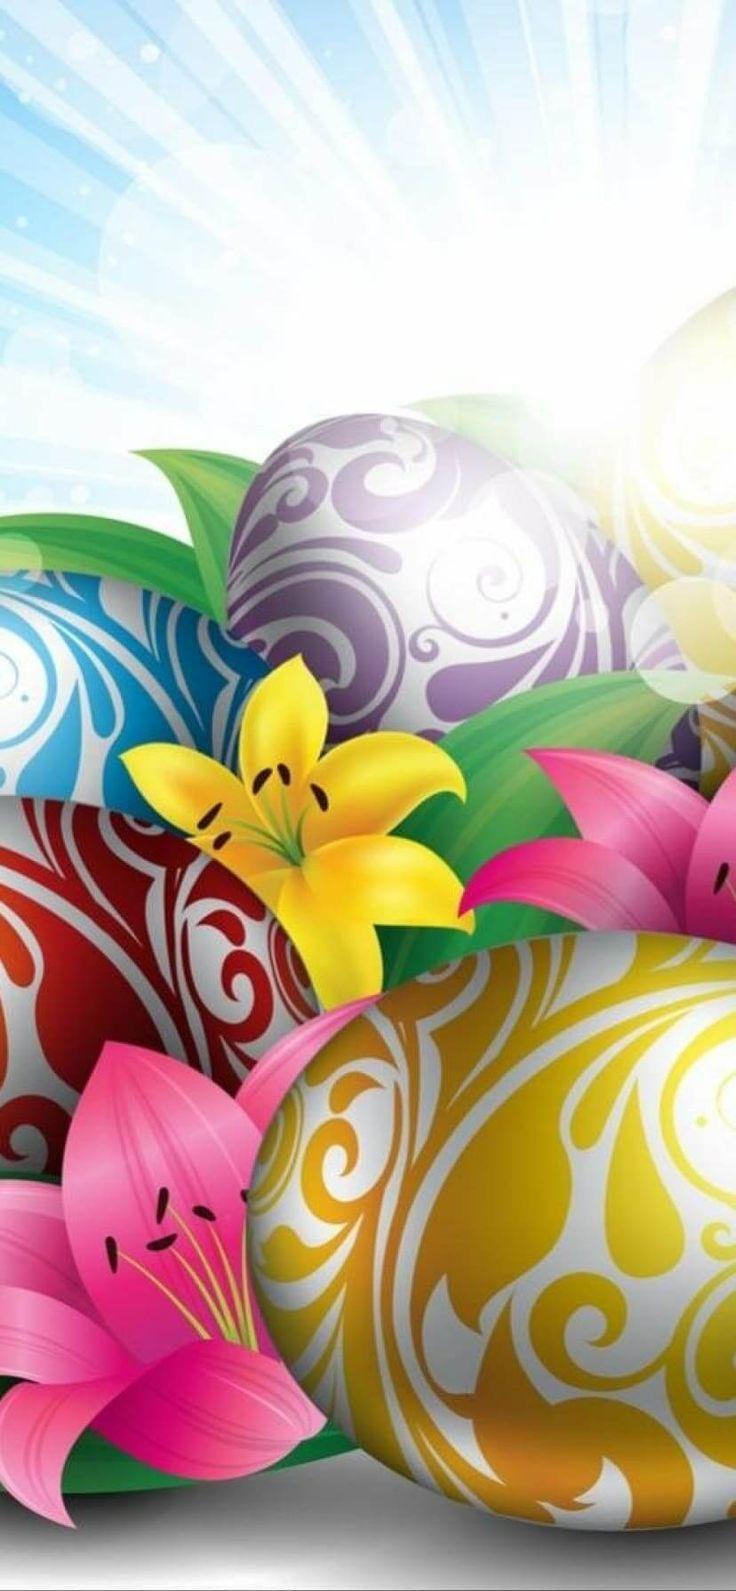 4K Happy Easter Wallpapers iPhone 13 pro max Backgrounds Easter